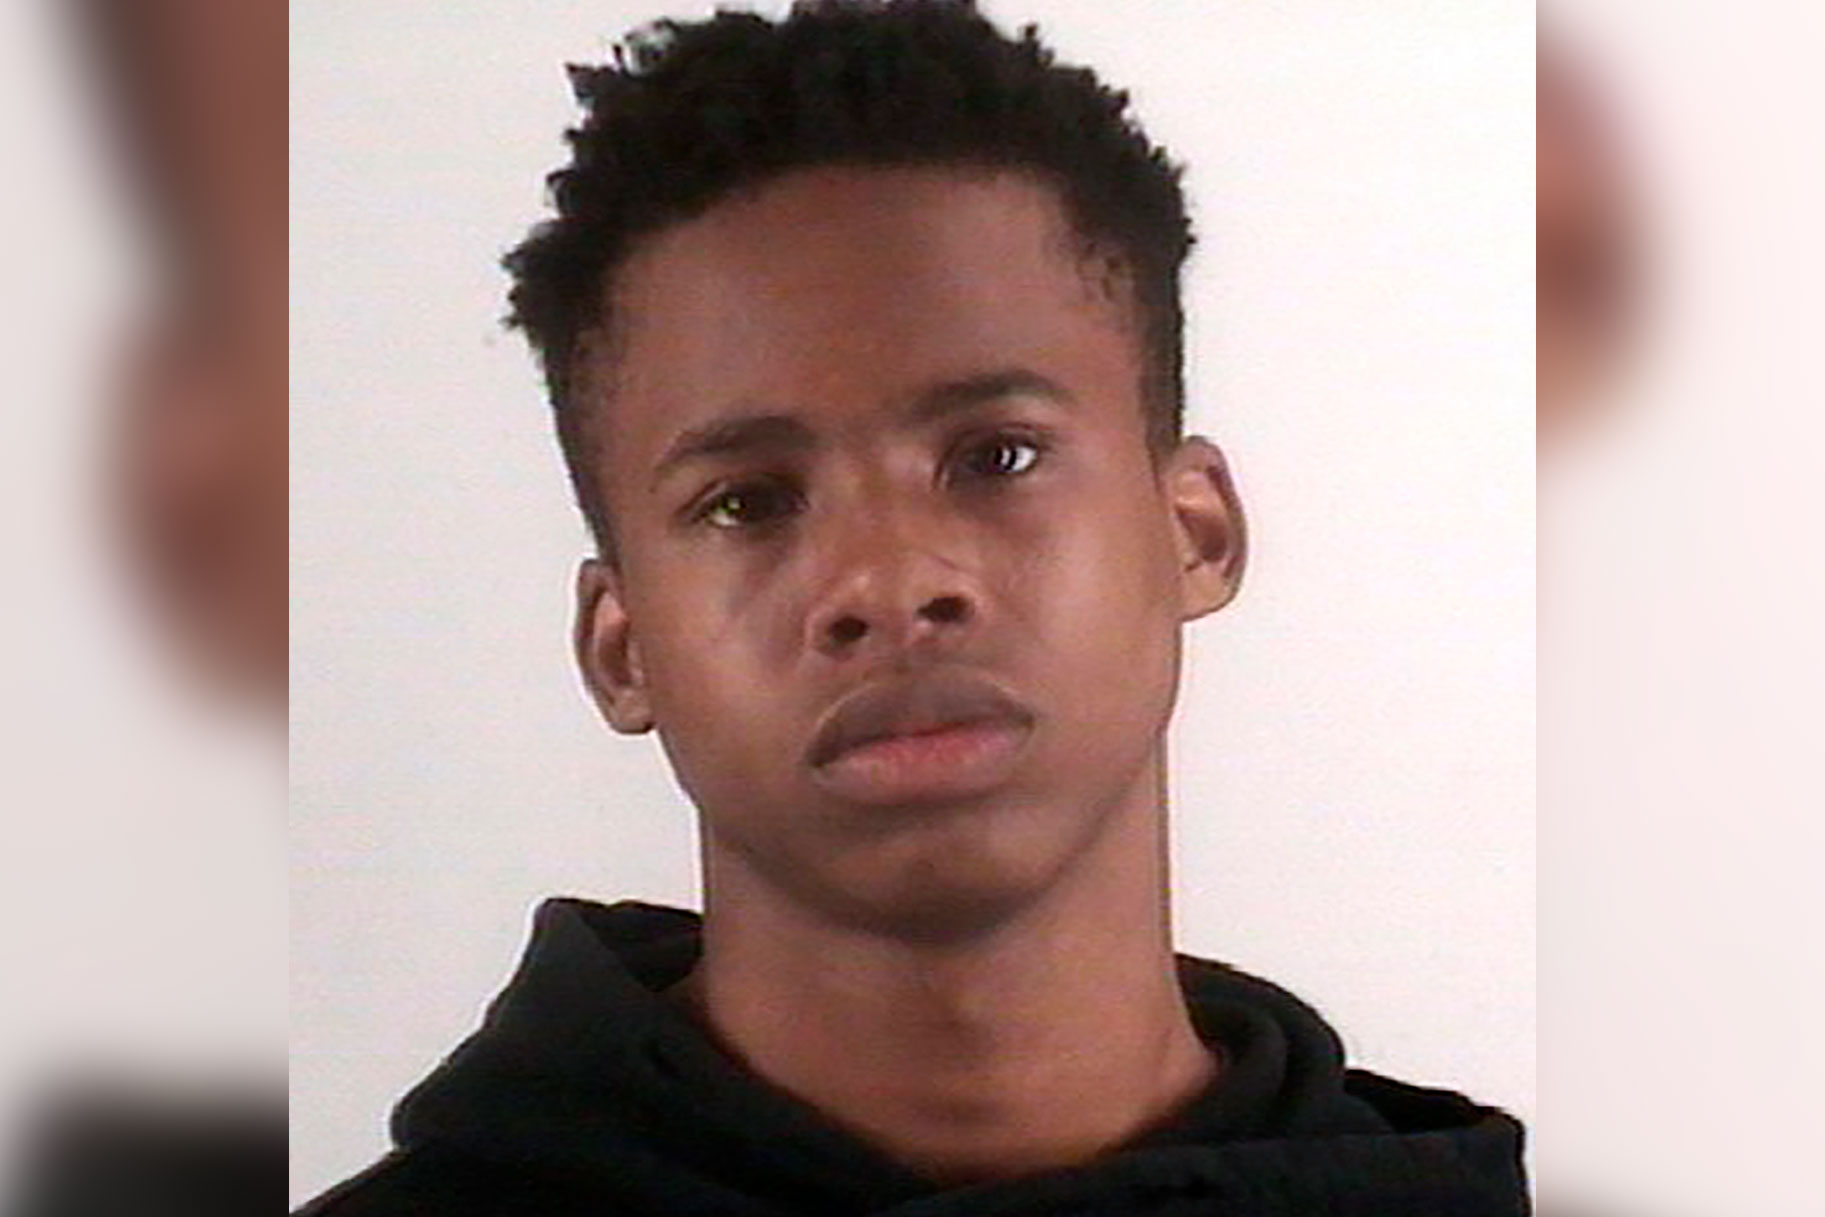 Teen rapper and former fugitive Tay-K, also known as Tay-K 47